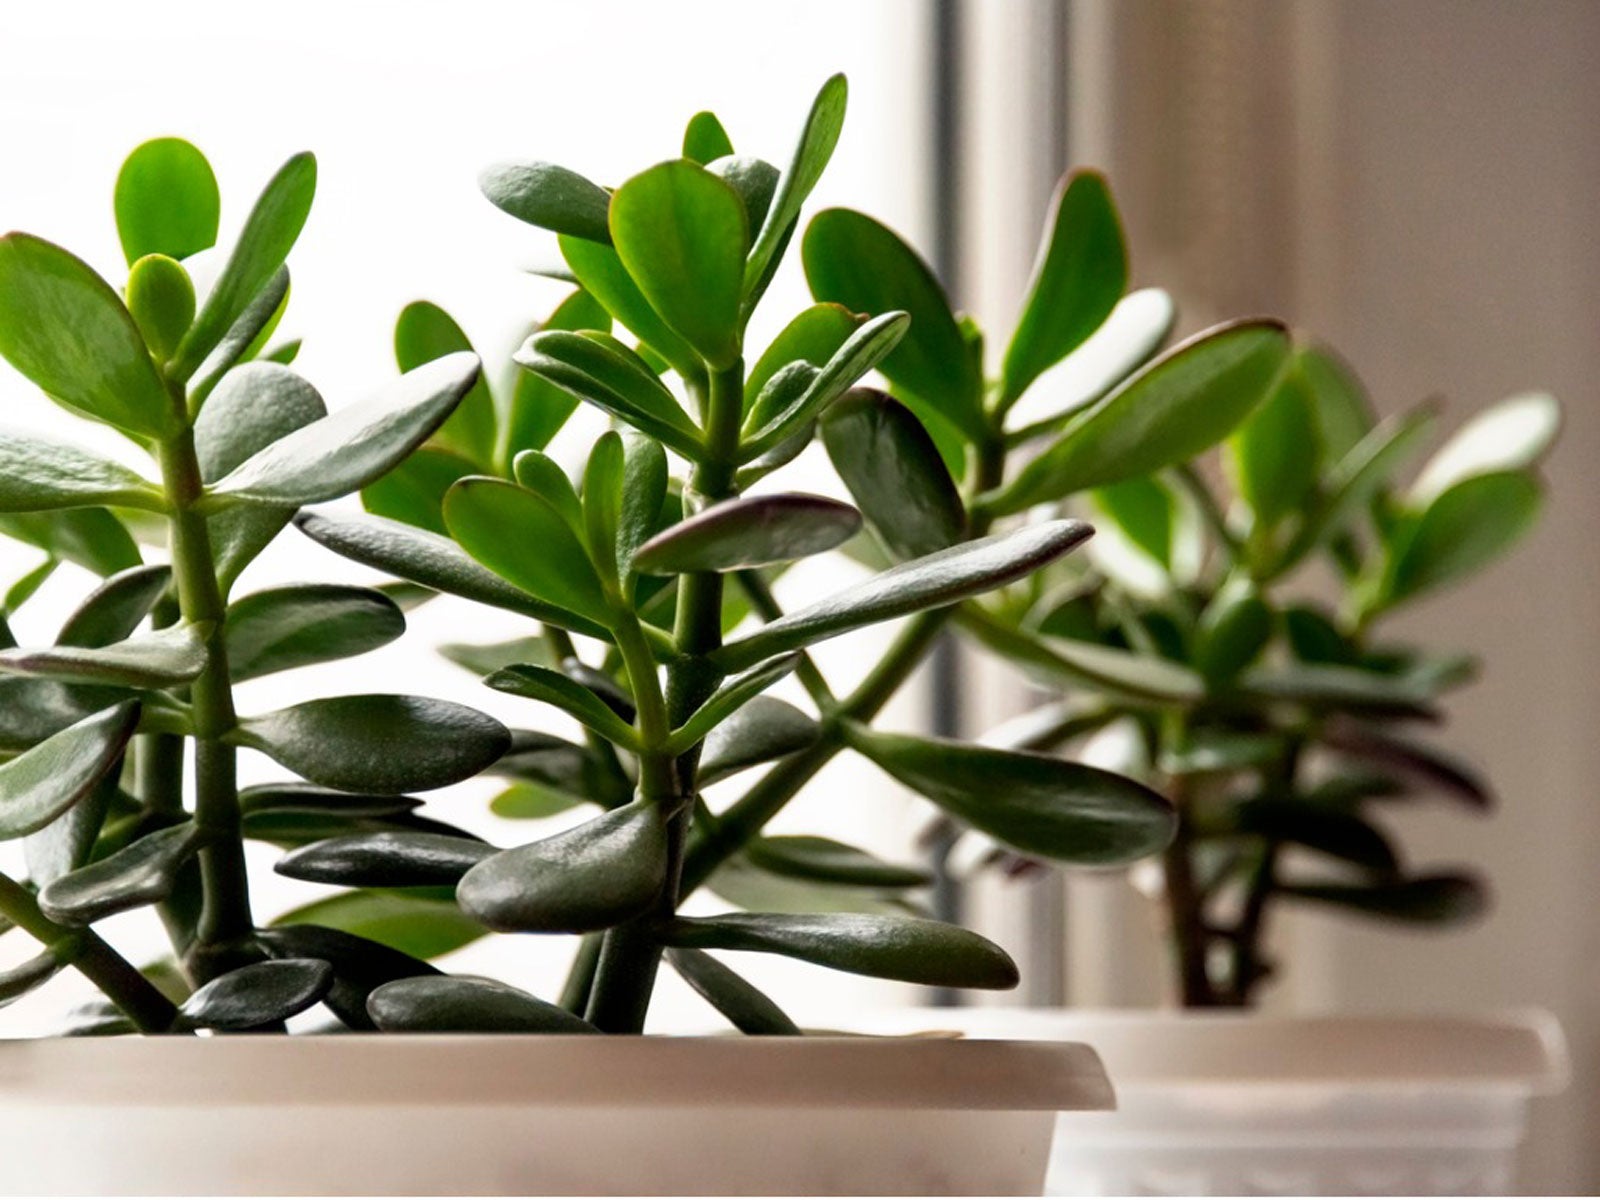 Reasons (and Fixes!) for Limp Leaves on Jade Plants